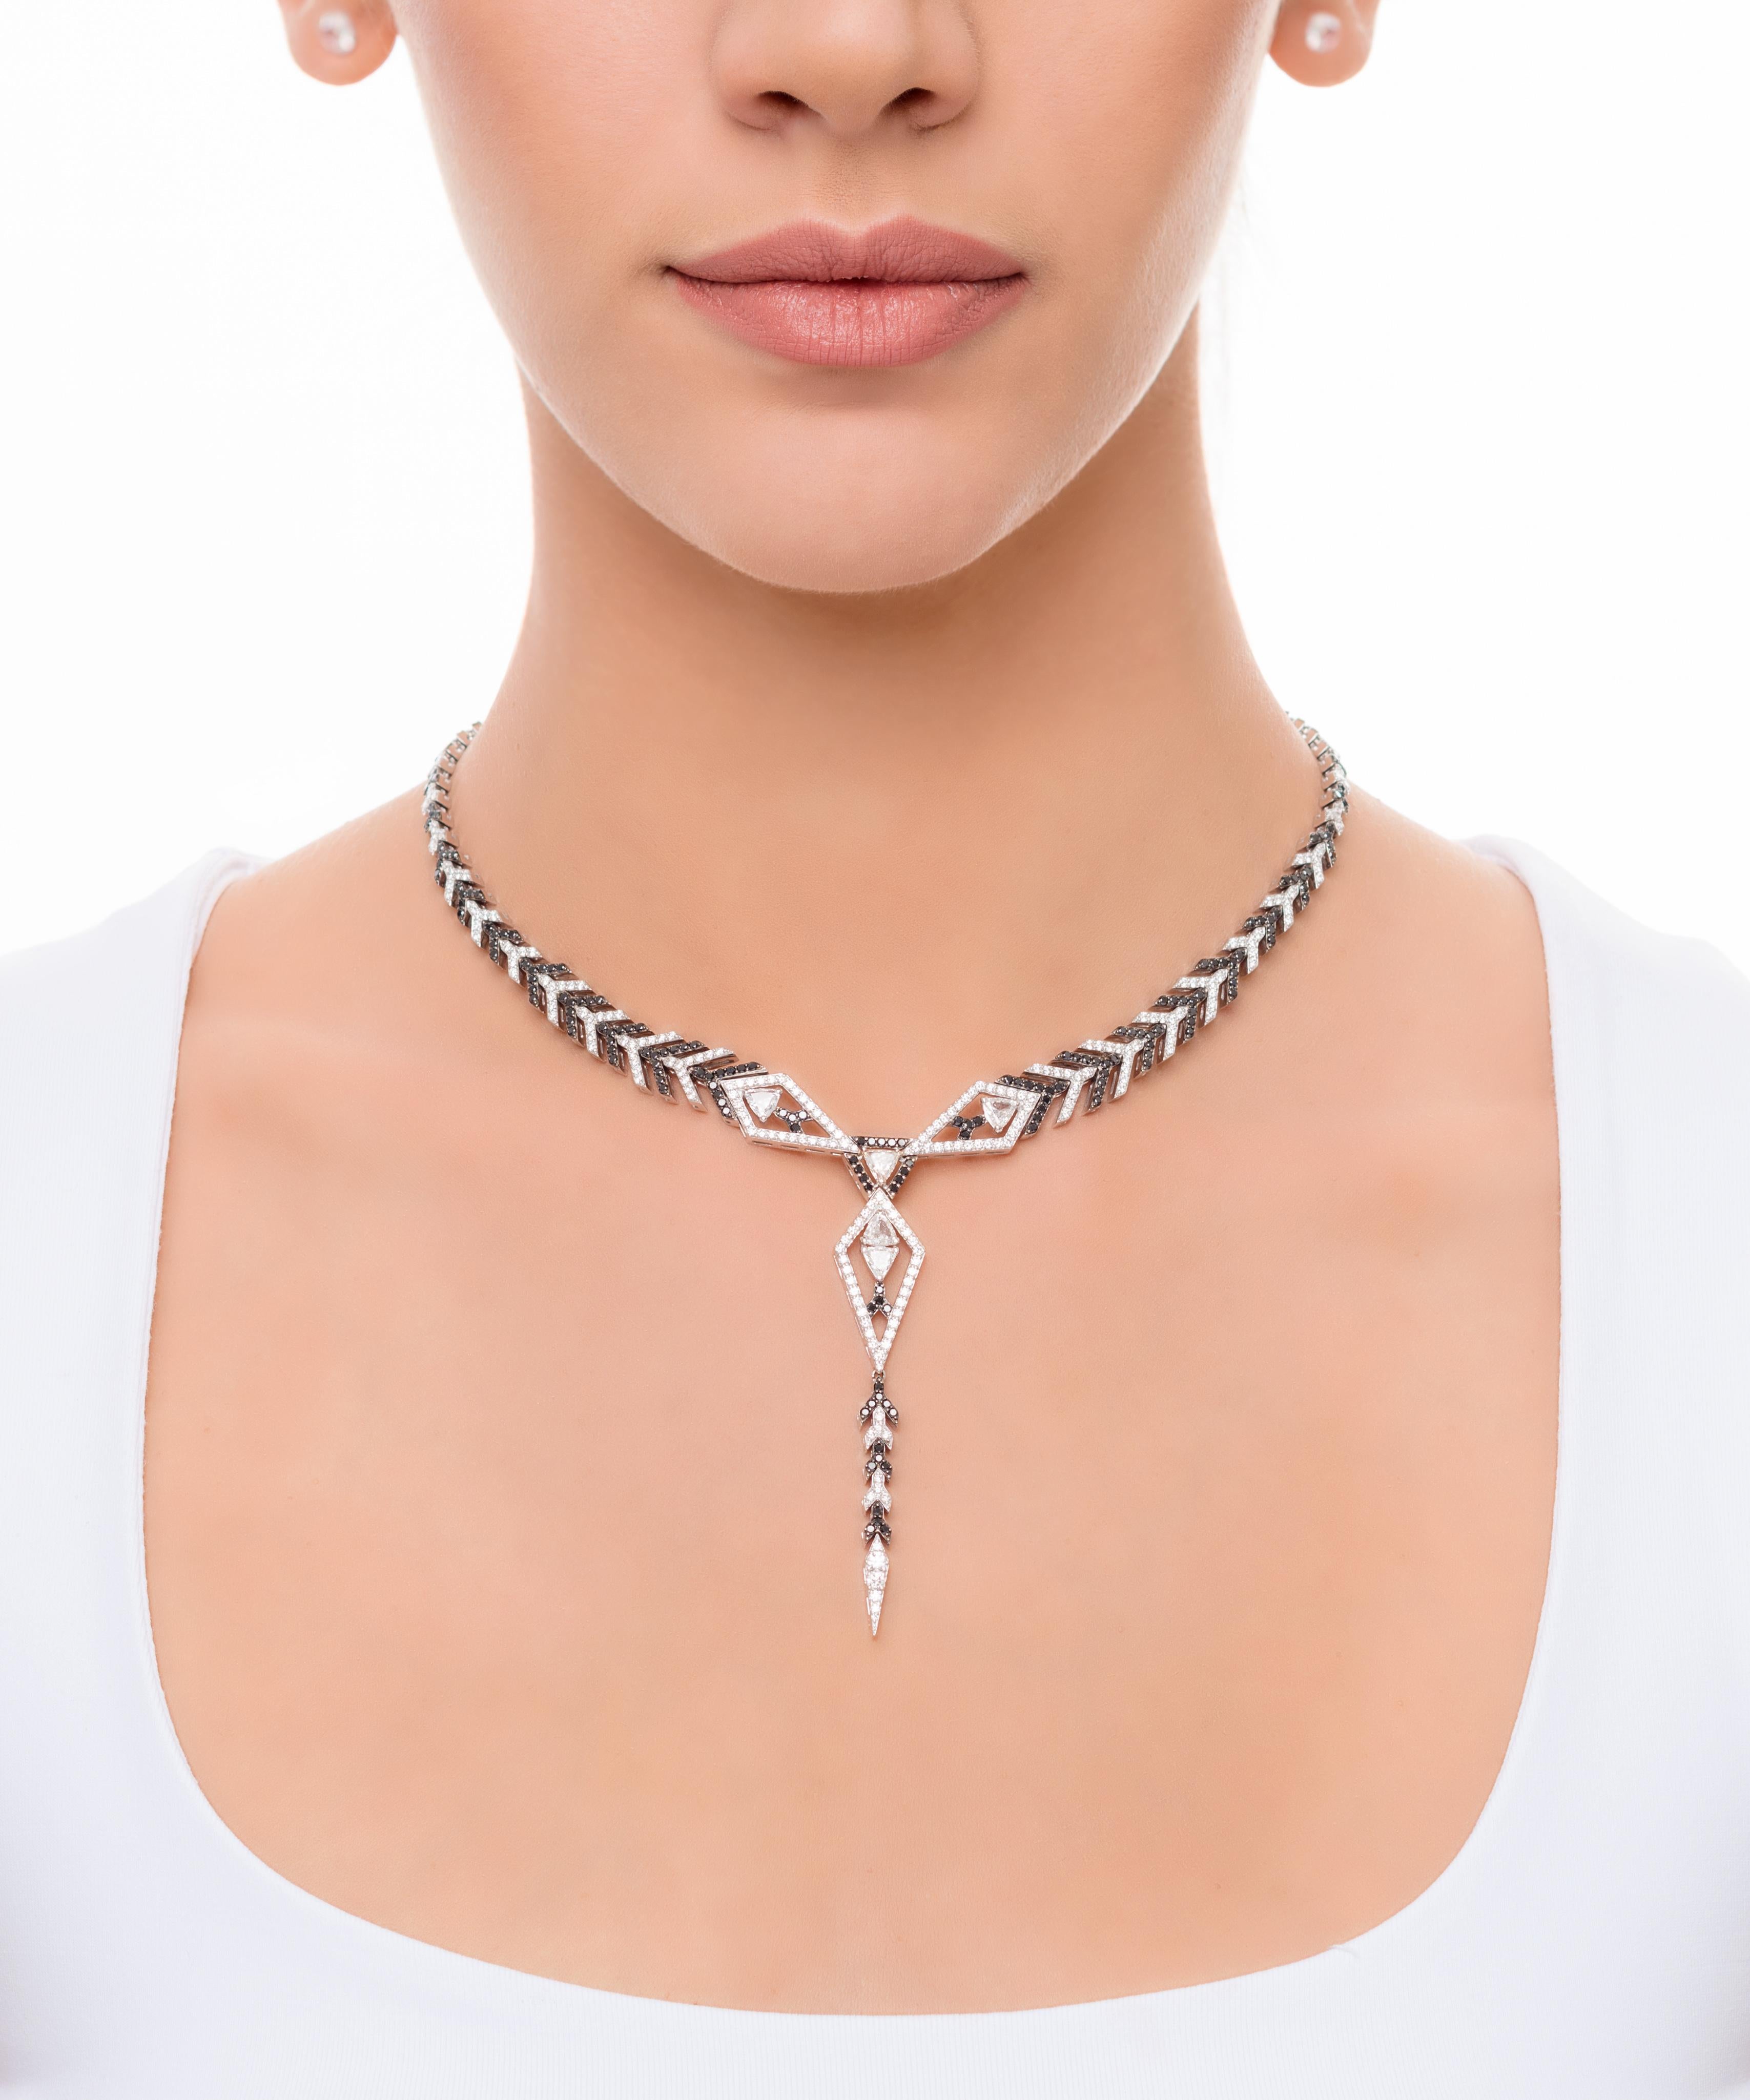 Alessa Arrow Necklace 18 Karat White Gold Amara Collection In New Condition For Sale In London, GB